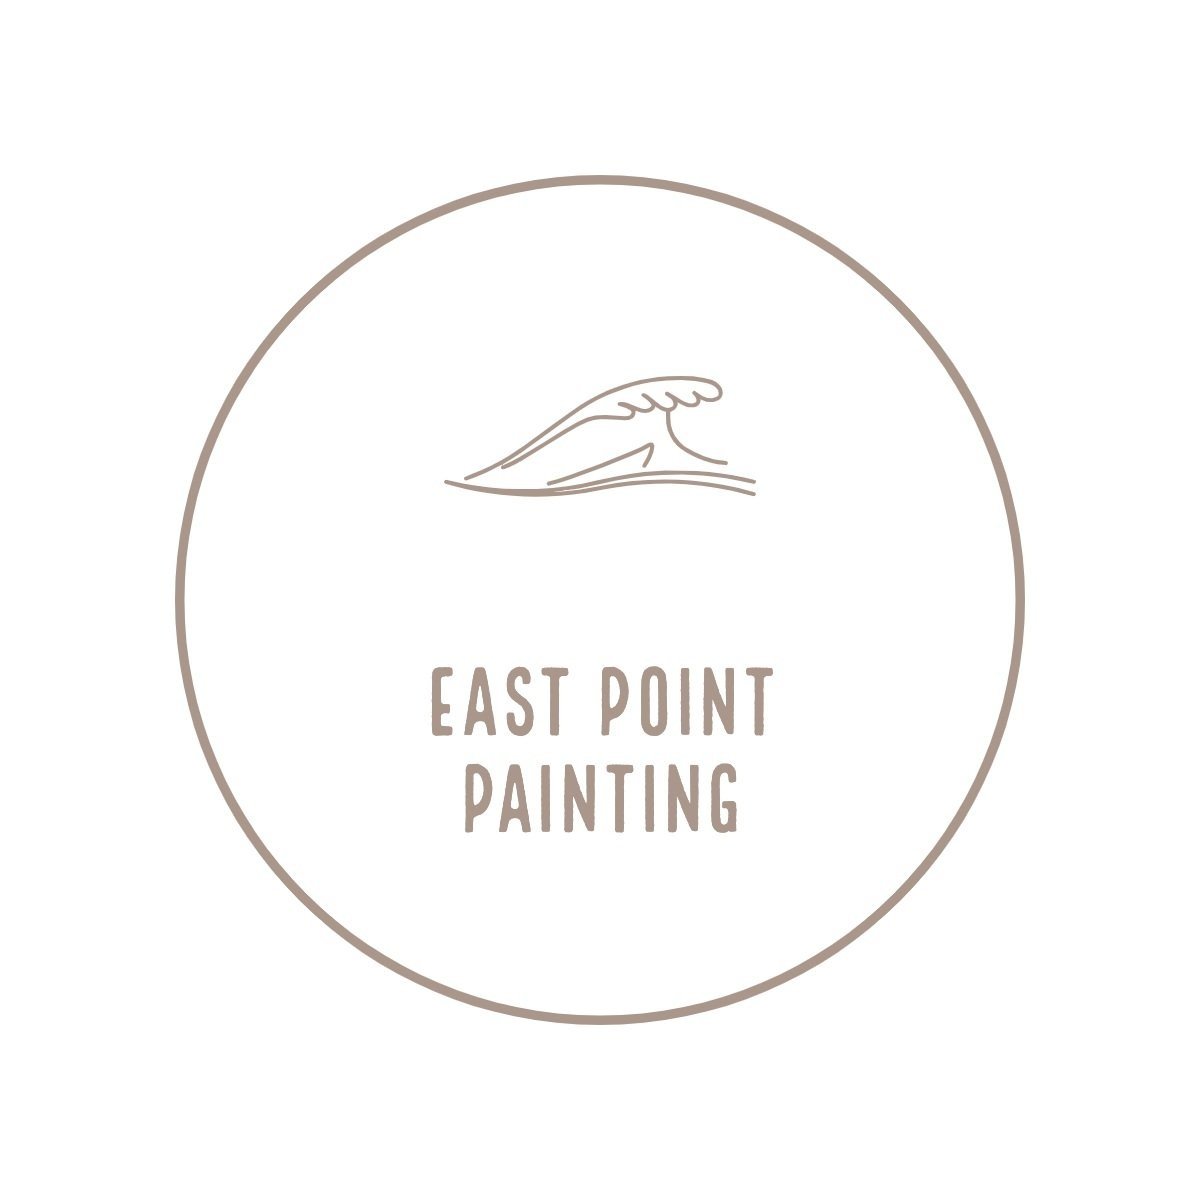 East point painting